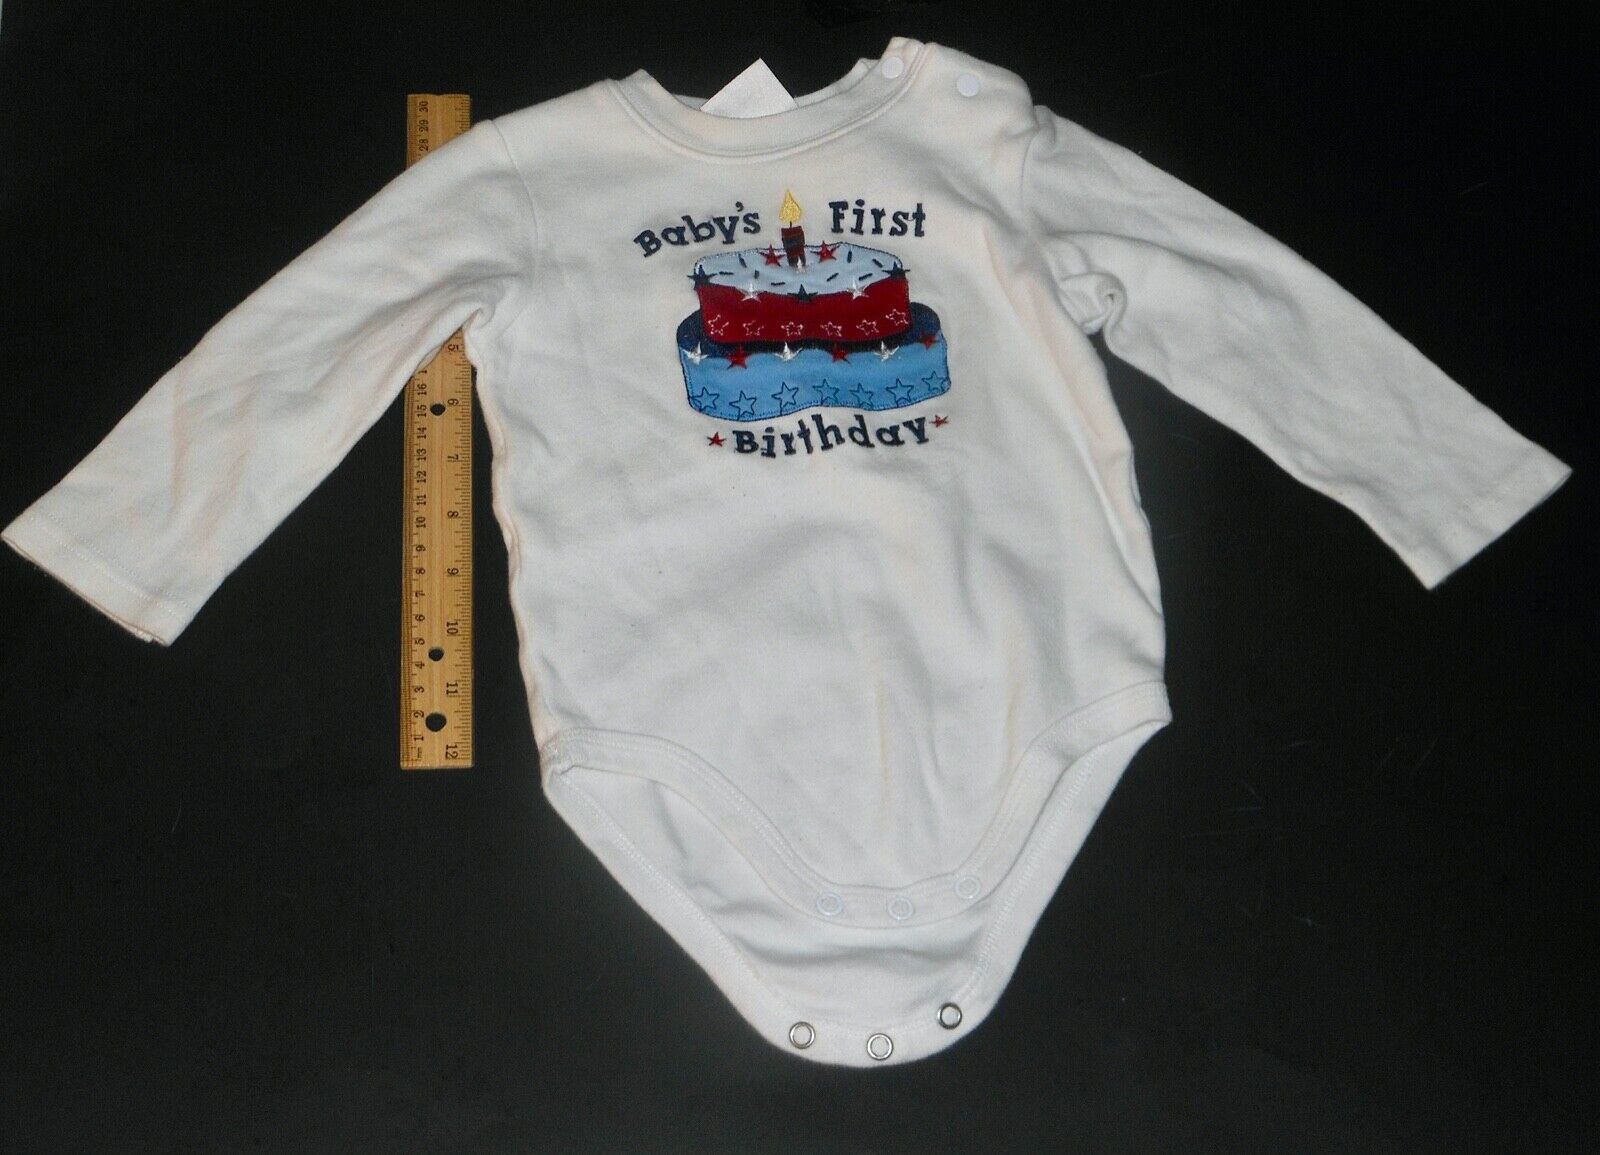 1st First Happy Birthday Party Long Sleeve Shirt Baby Boy Size 24 Months